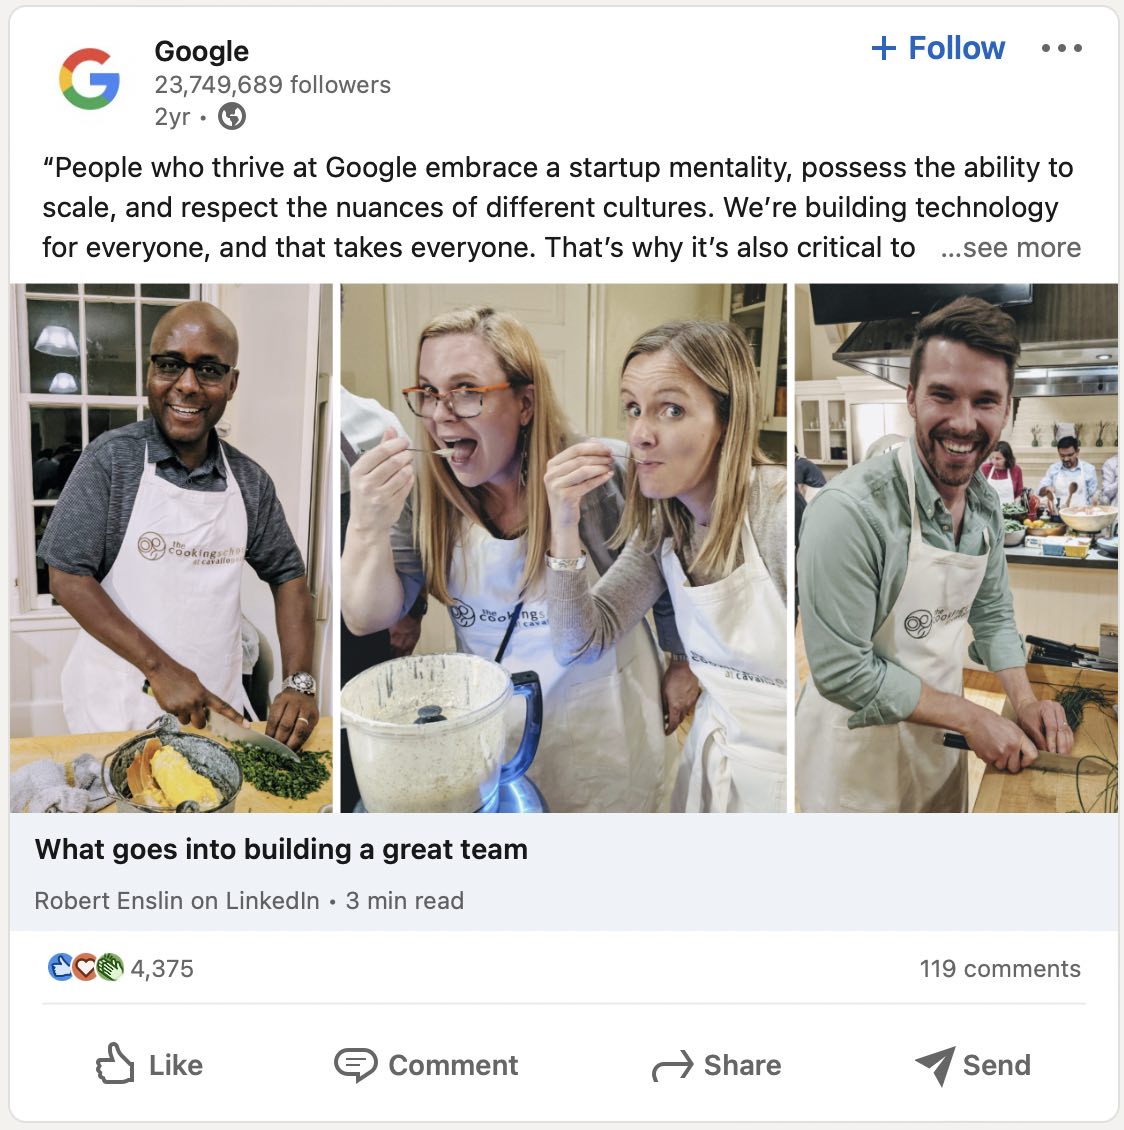 Screenshot of a post on Google's LinkedIn page showing employees cooking